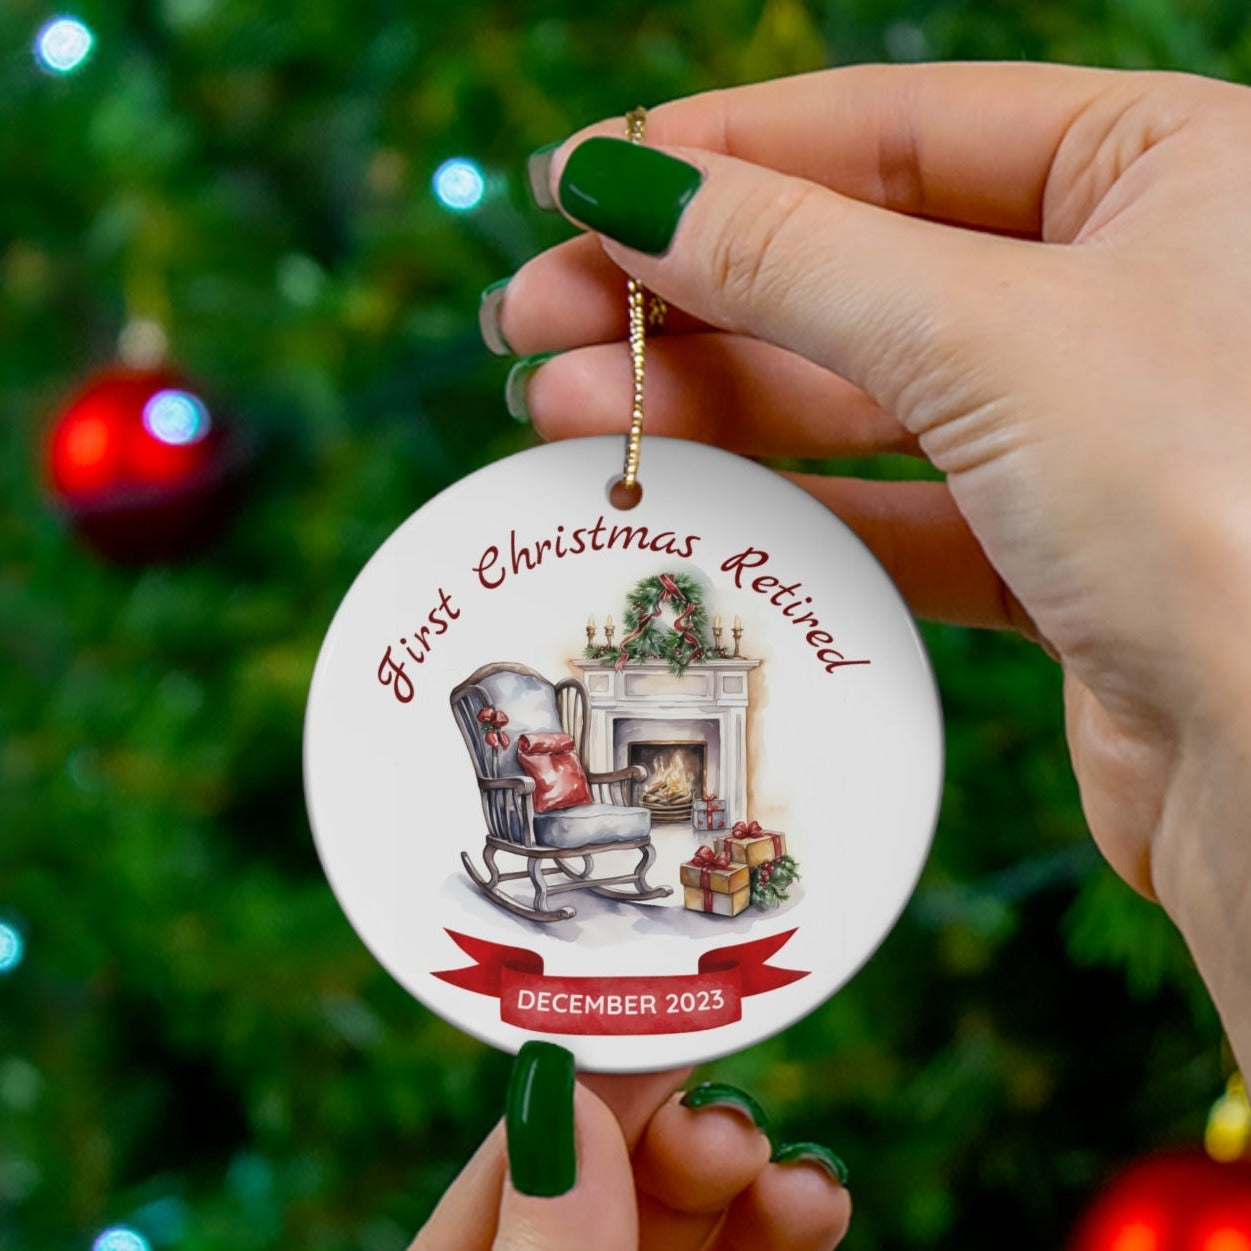 First Christmas Retired Ornament, 2023 Keepsake Holiday Ornament - Perfect Gift for Retiree